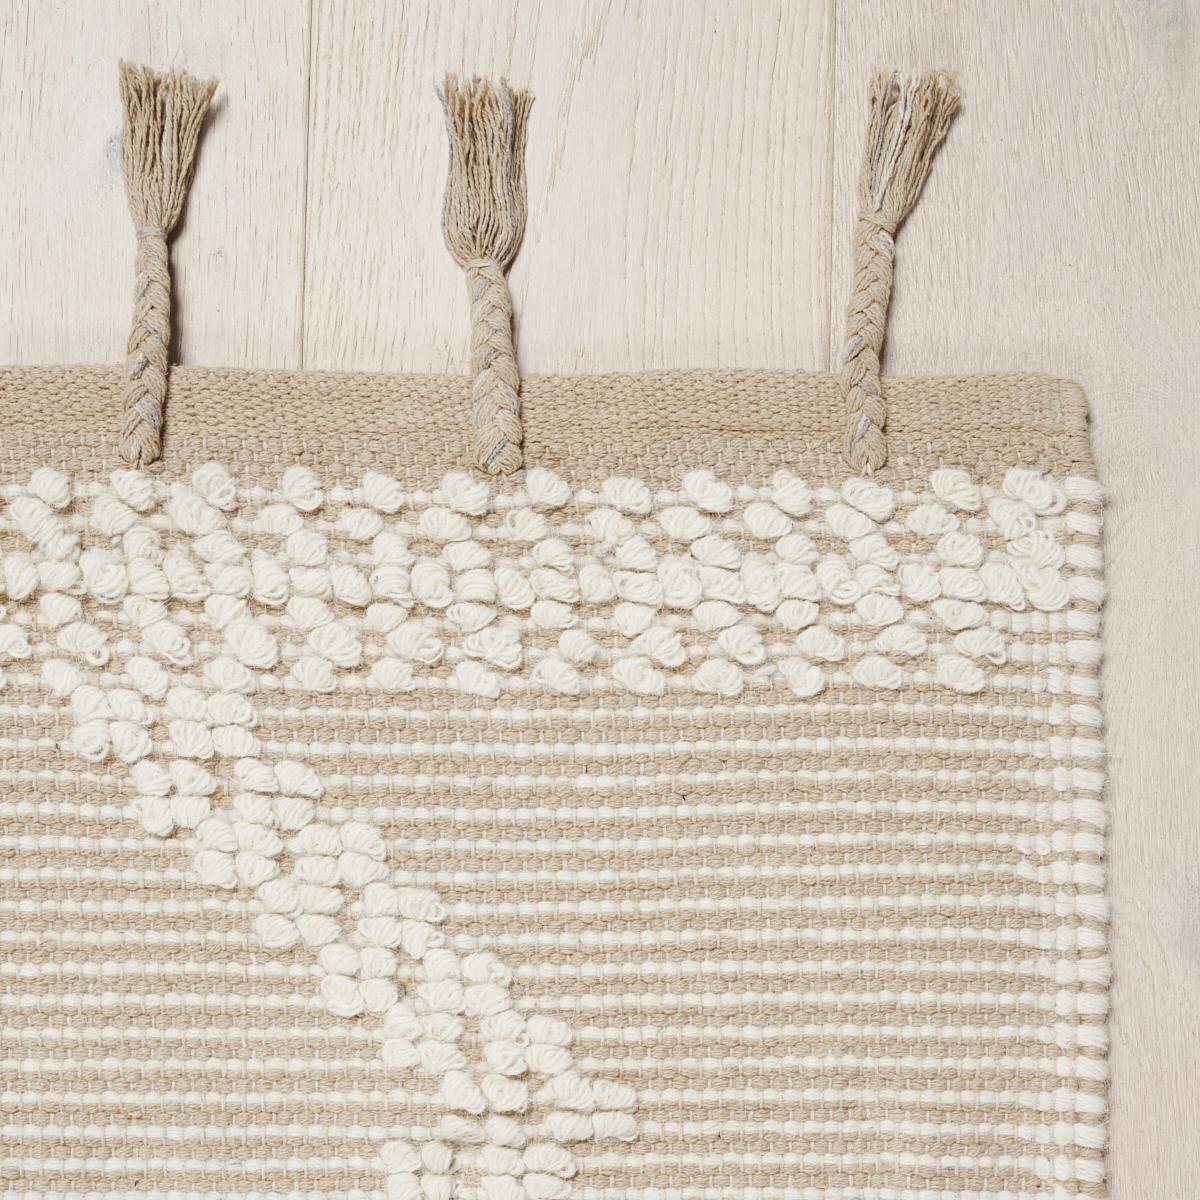 Made of wool and cotton on a traditional pit loom, Malta French Knot is a dynamic stripe with lovely dimension and texture accentuated by tassel fringe. This versatile geometric design has a casual look that works absolutely anywhere.
